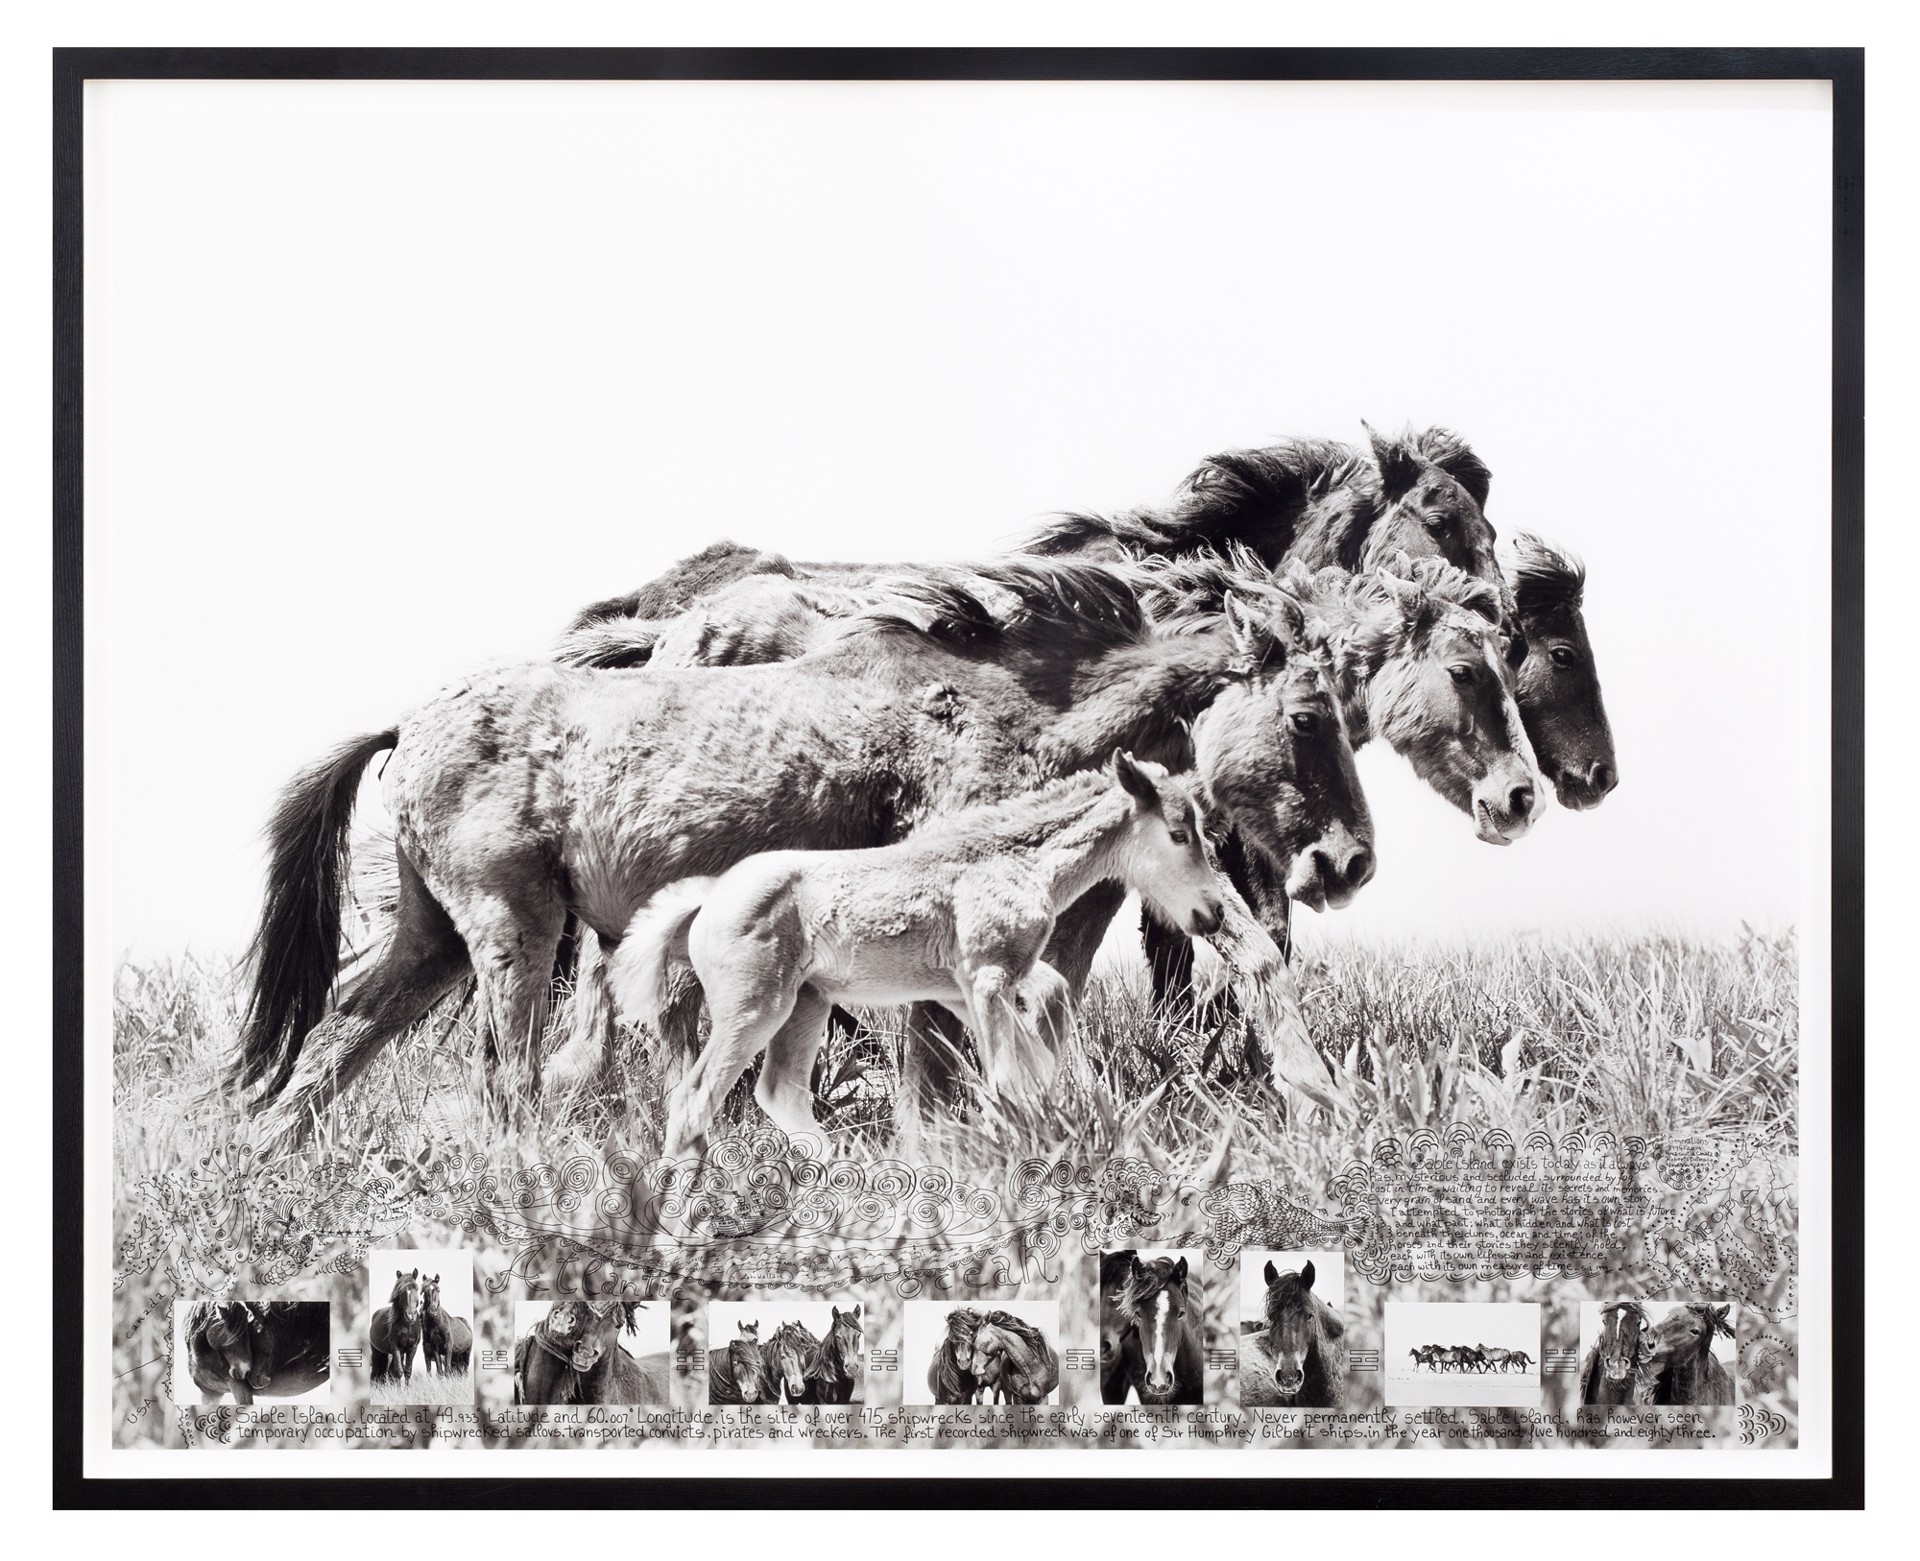 Generations- The Wild Horses of Sable Island by Roberto Dutesco